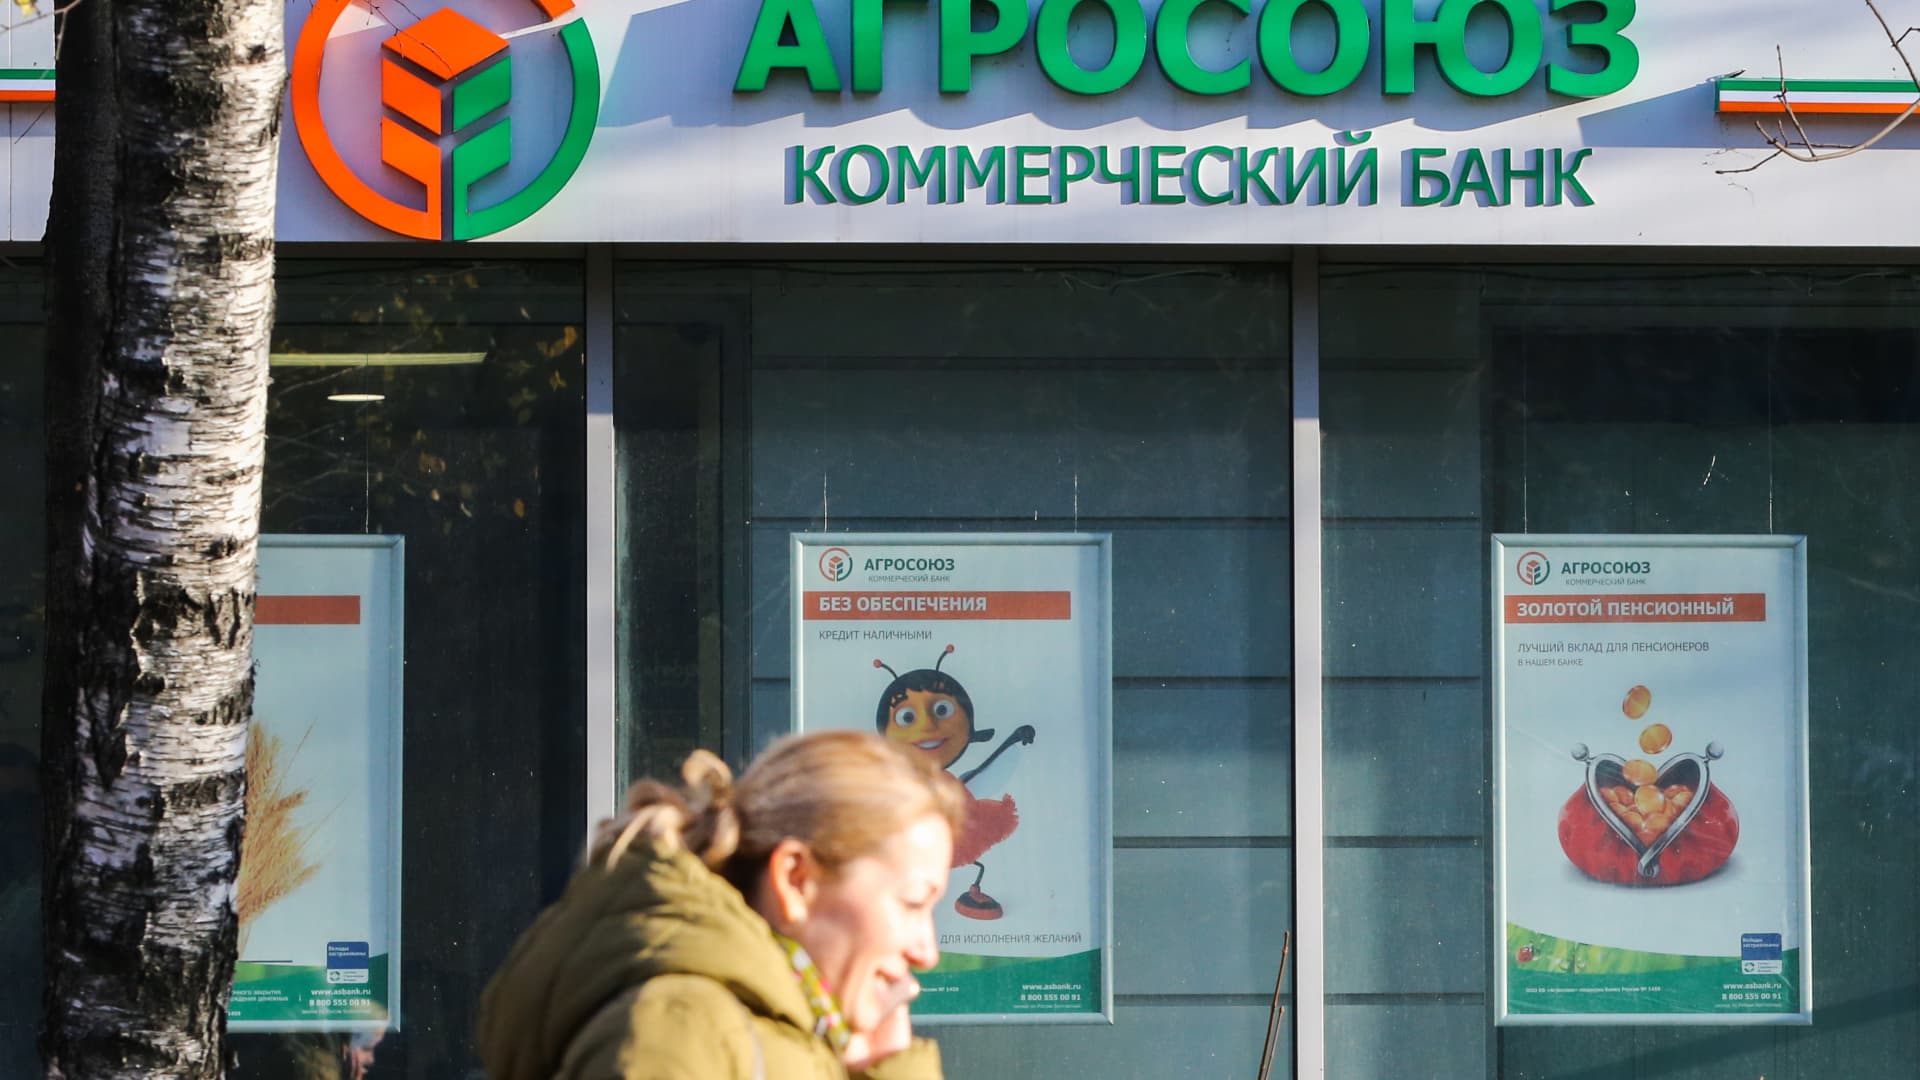 A branch of Agrosoyuz Bank in Moscow.